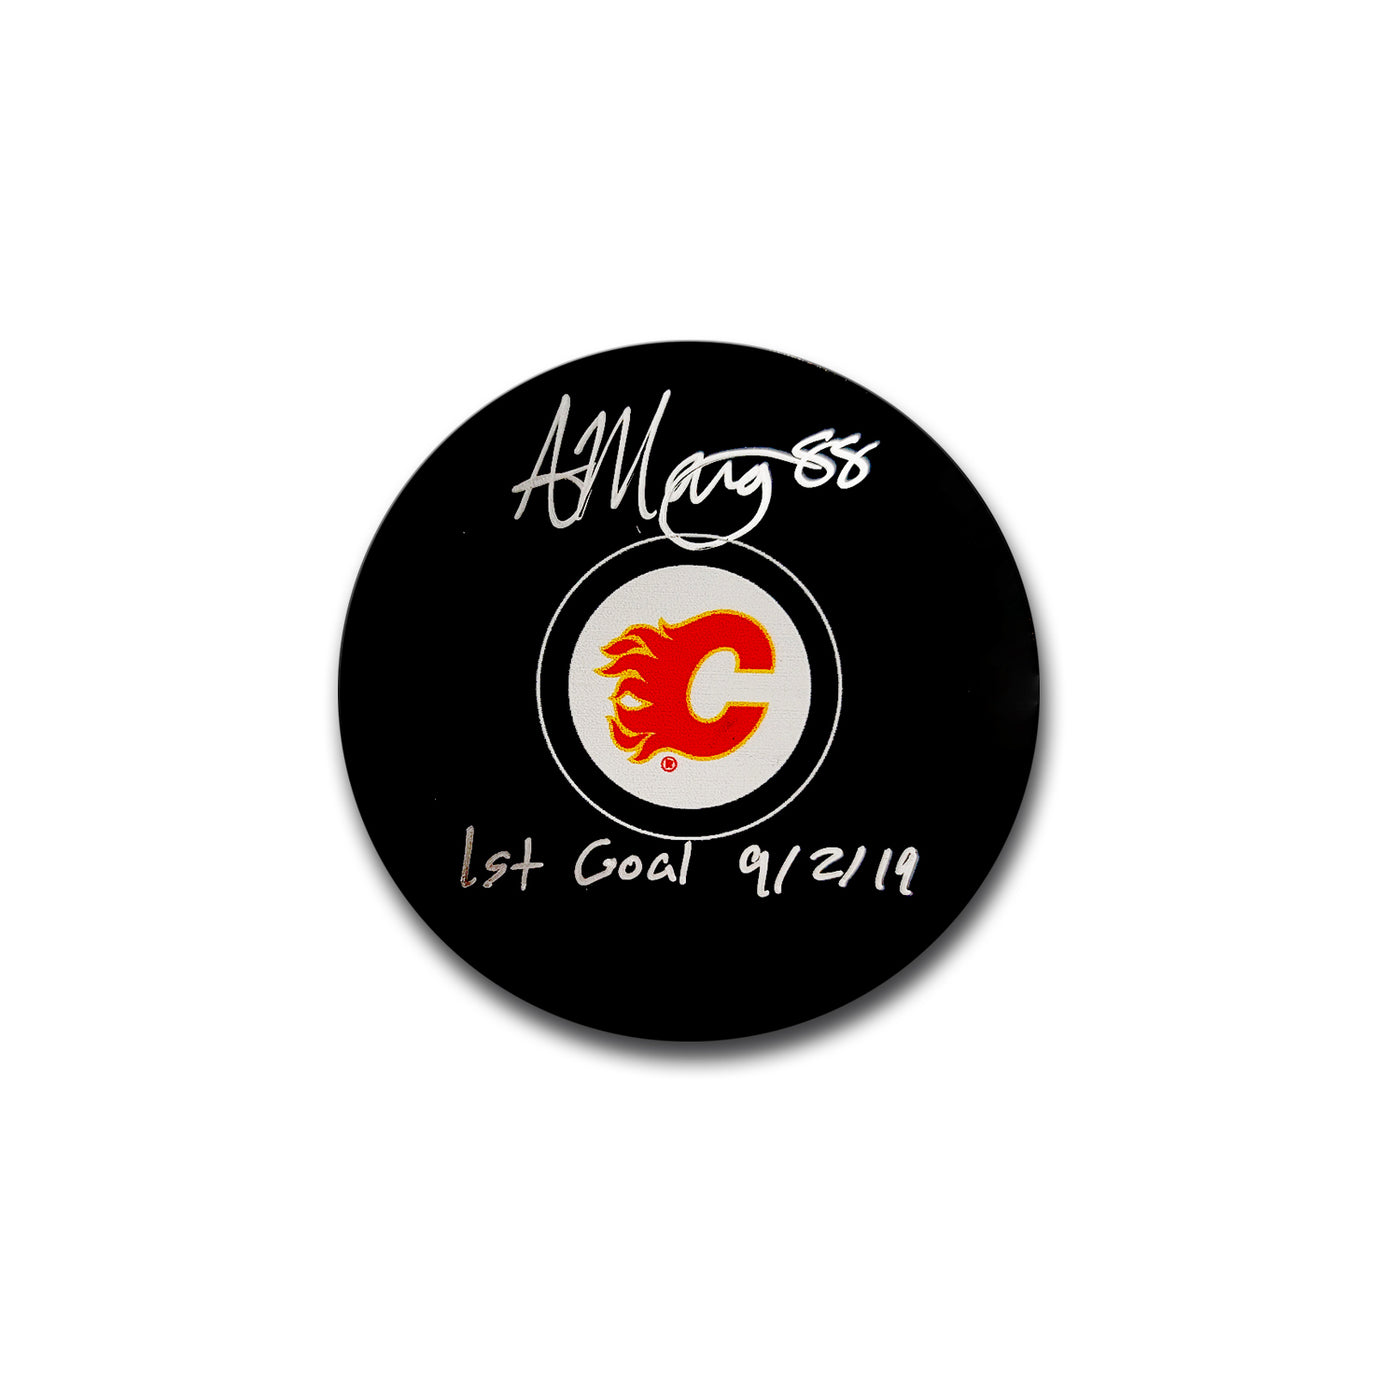 Andrew Mangiapane Calgary Flames Autographed Hockey Puck Inscribed 1st Goal 9/2/19